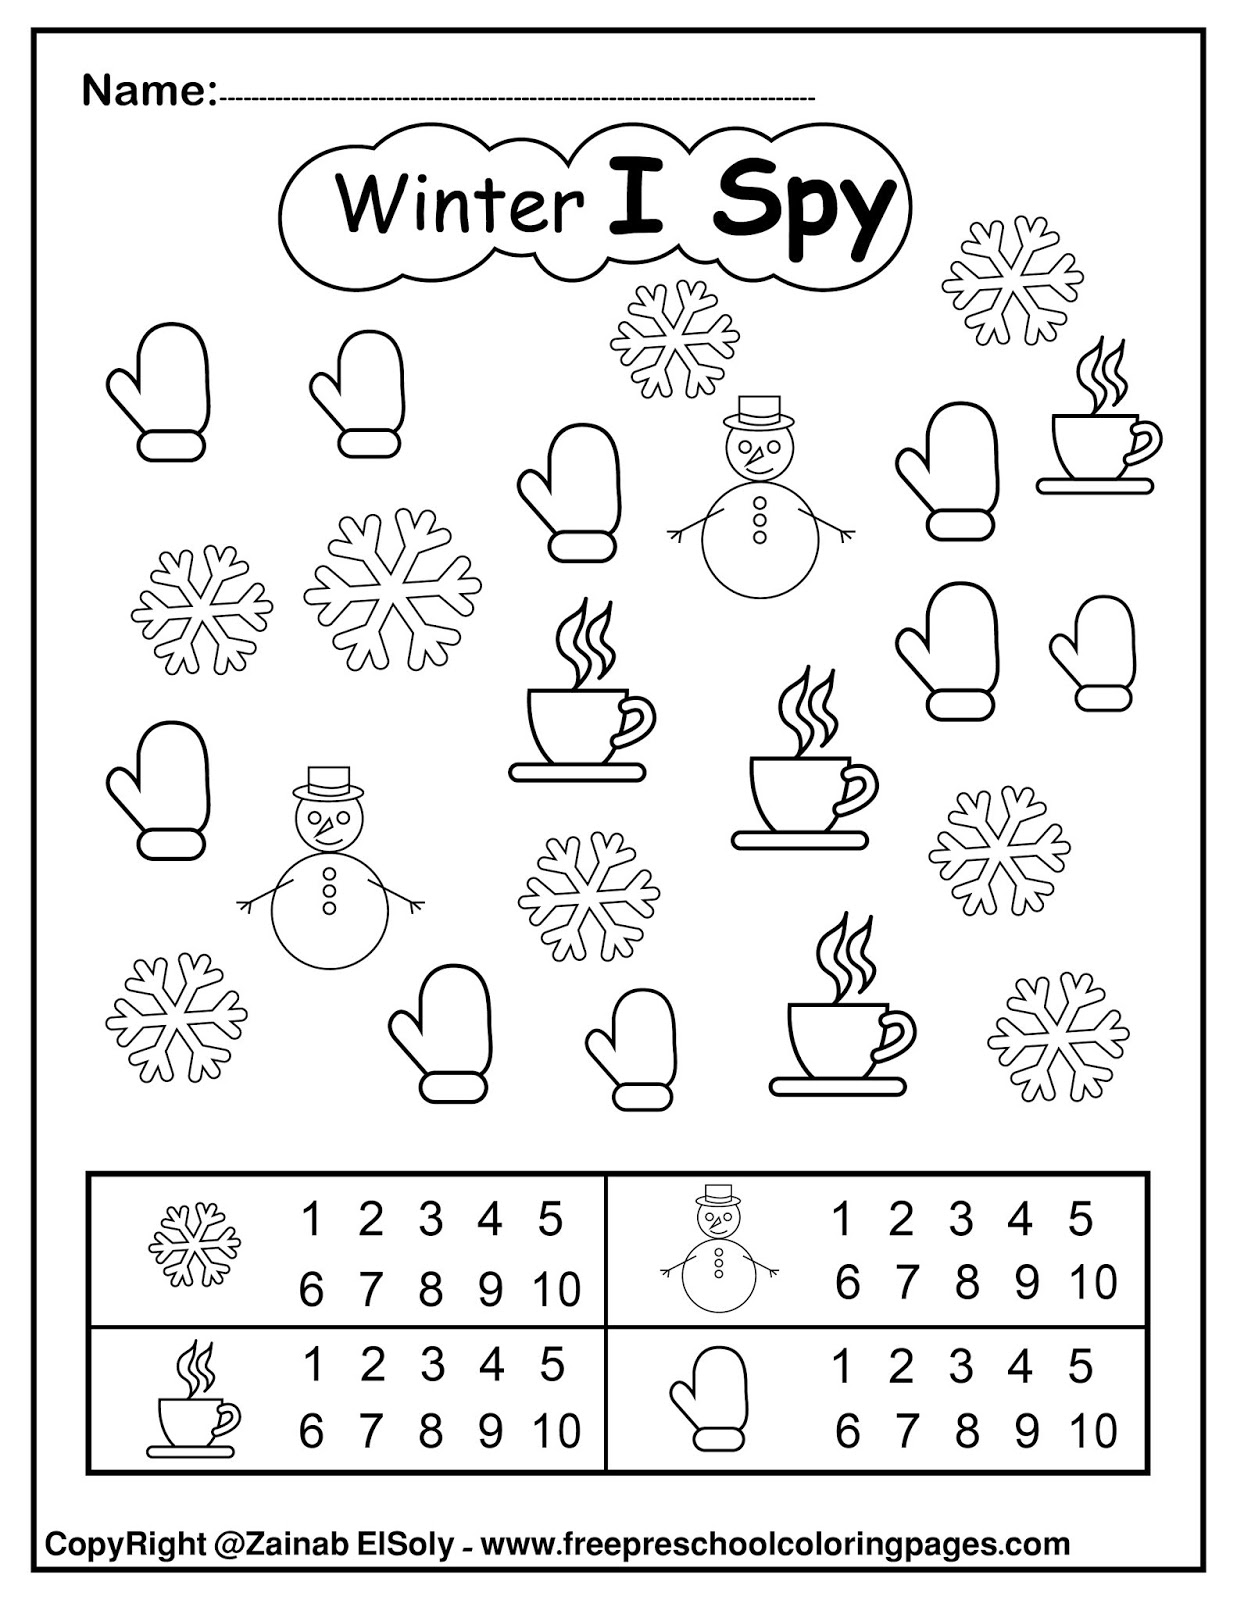 I Spy Coloring Pages For Kids Smart kiddy blogspot